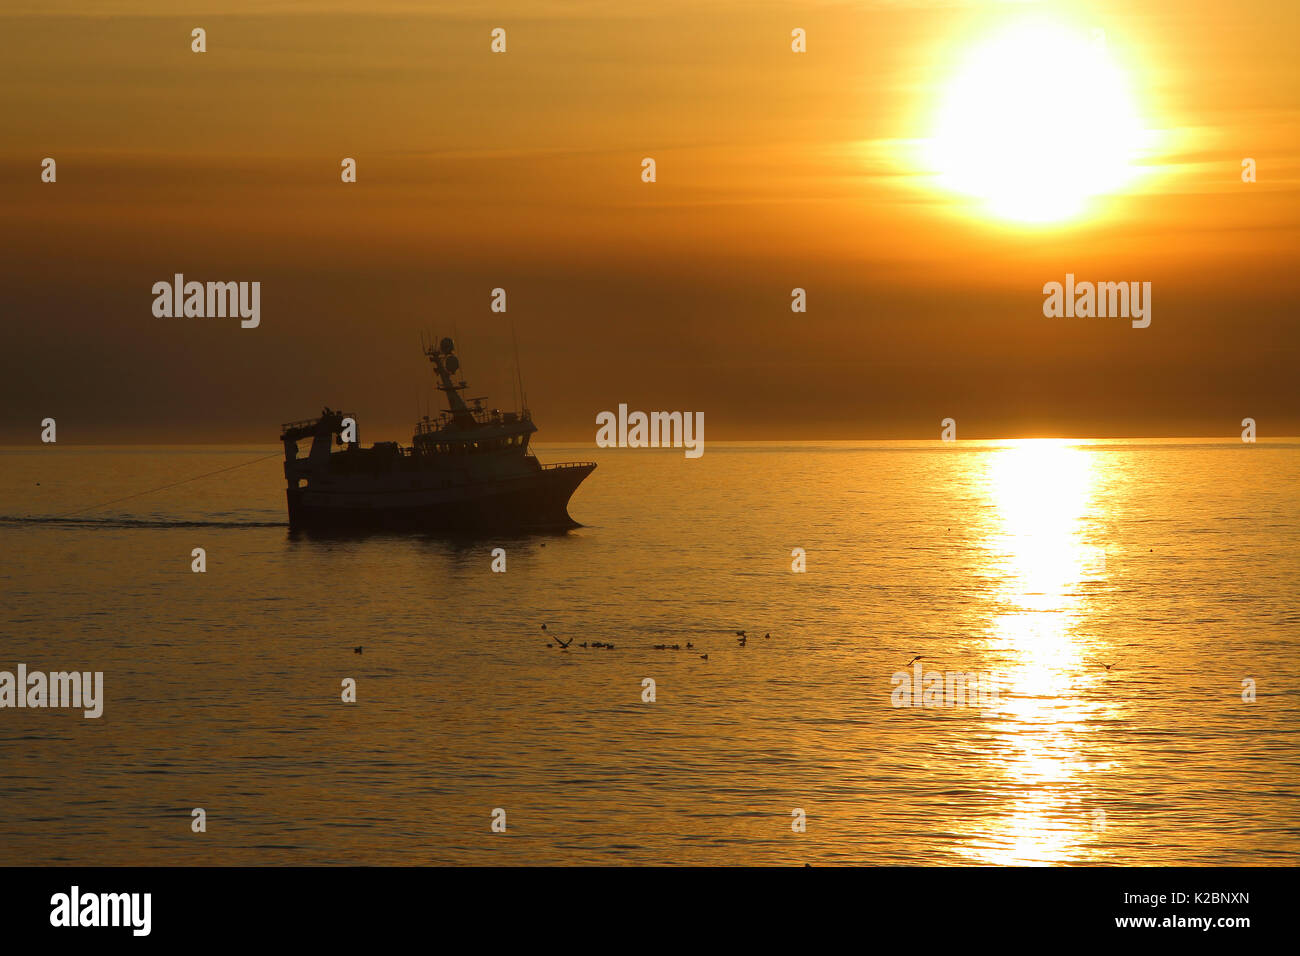 Fishing vessel 'Harvester' trawling at sunrise, North Sea, September 2015.  Property released. Stock Photo